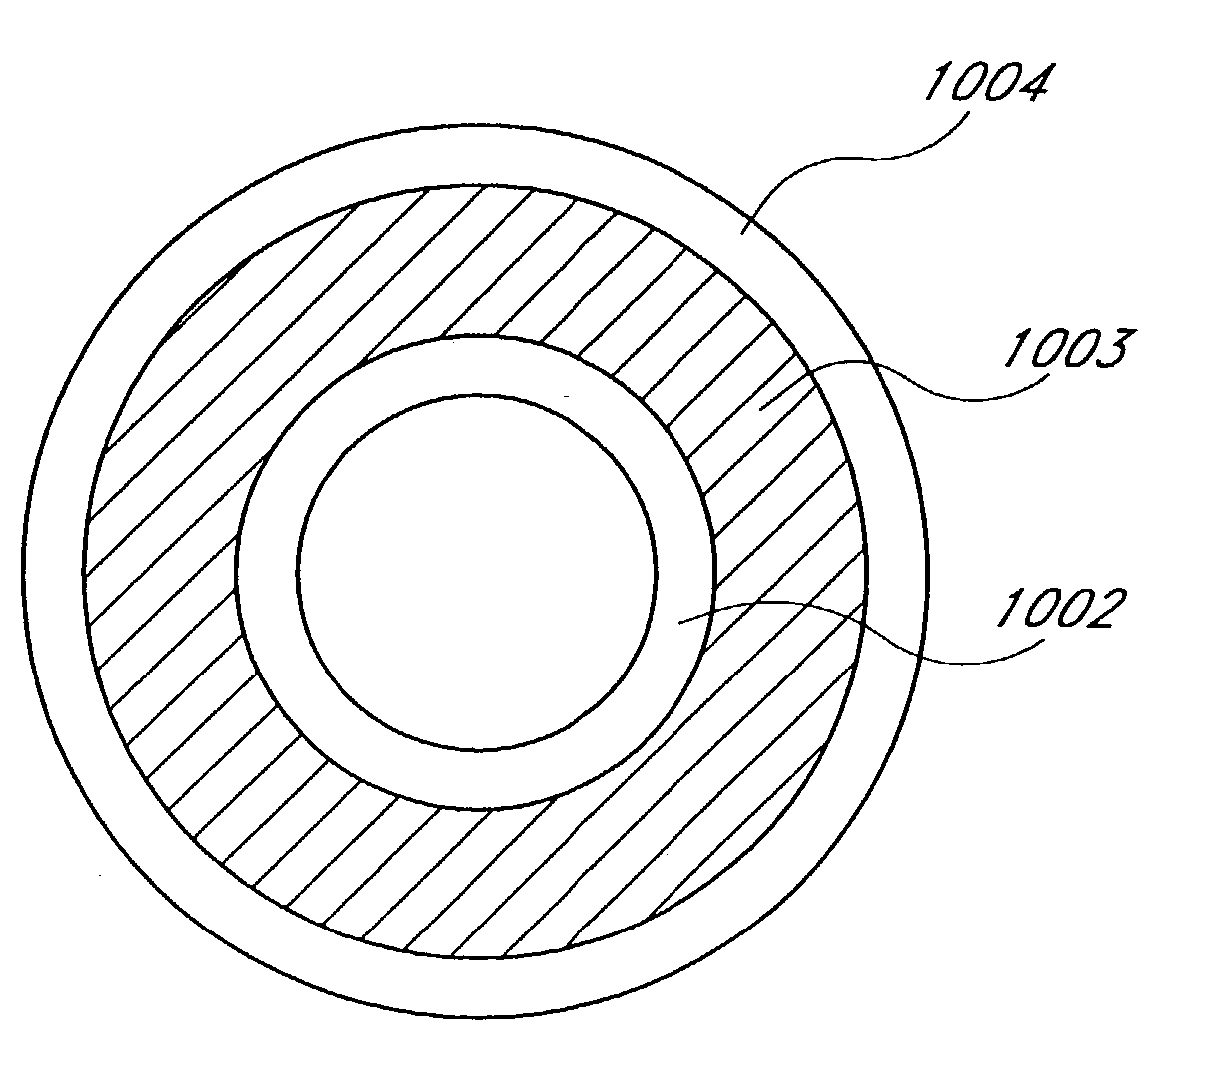 Medical device with sensor cooperating with expandable member